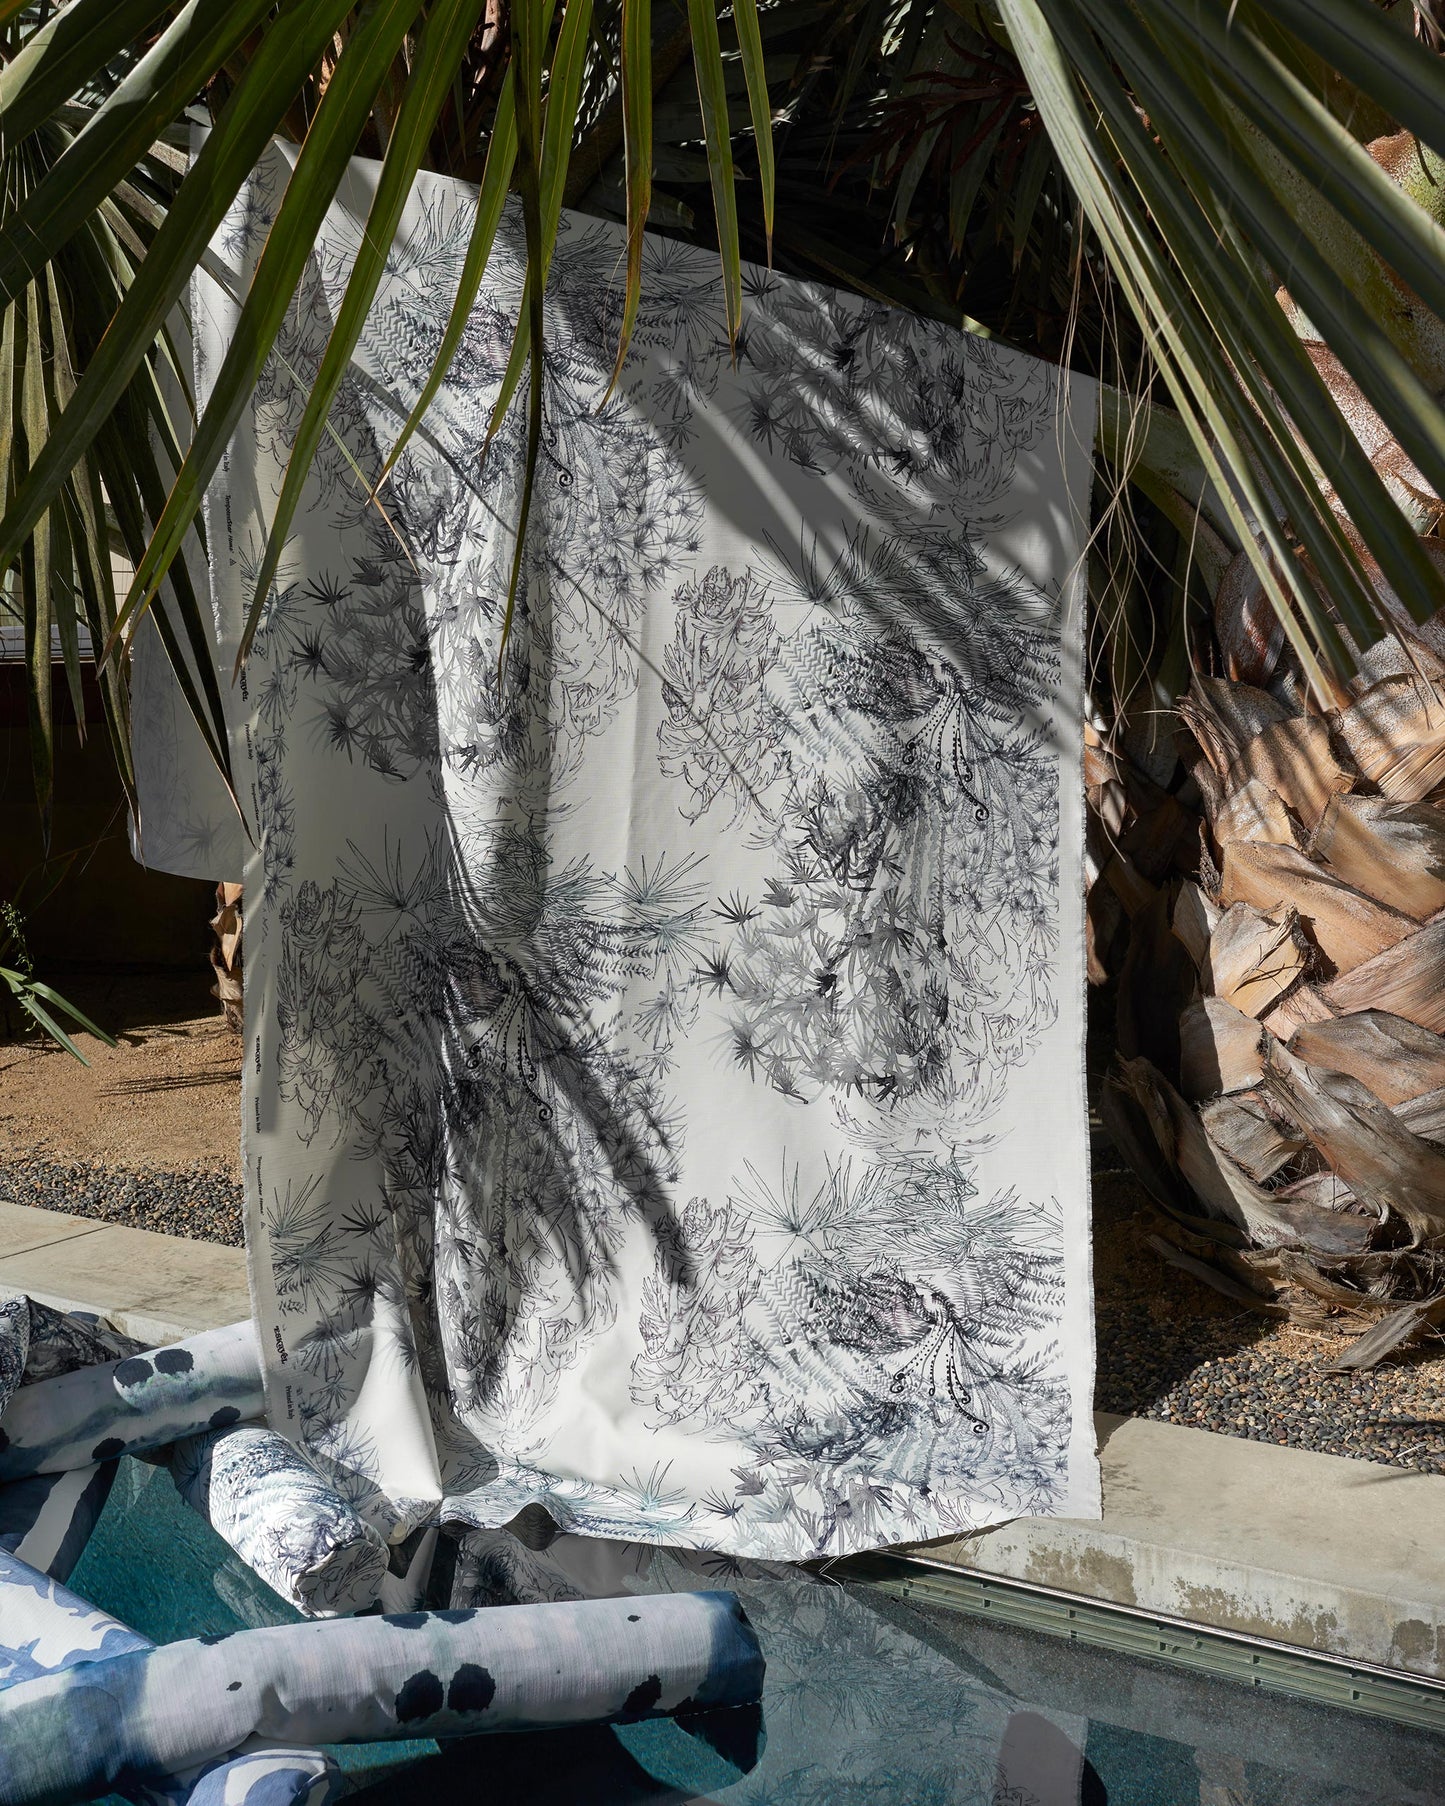 A luxury performance fabric with the Domenica Performance Fabric Notte pattern, featuring a palm tree design, placed next to a pool in the Salentu Collection